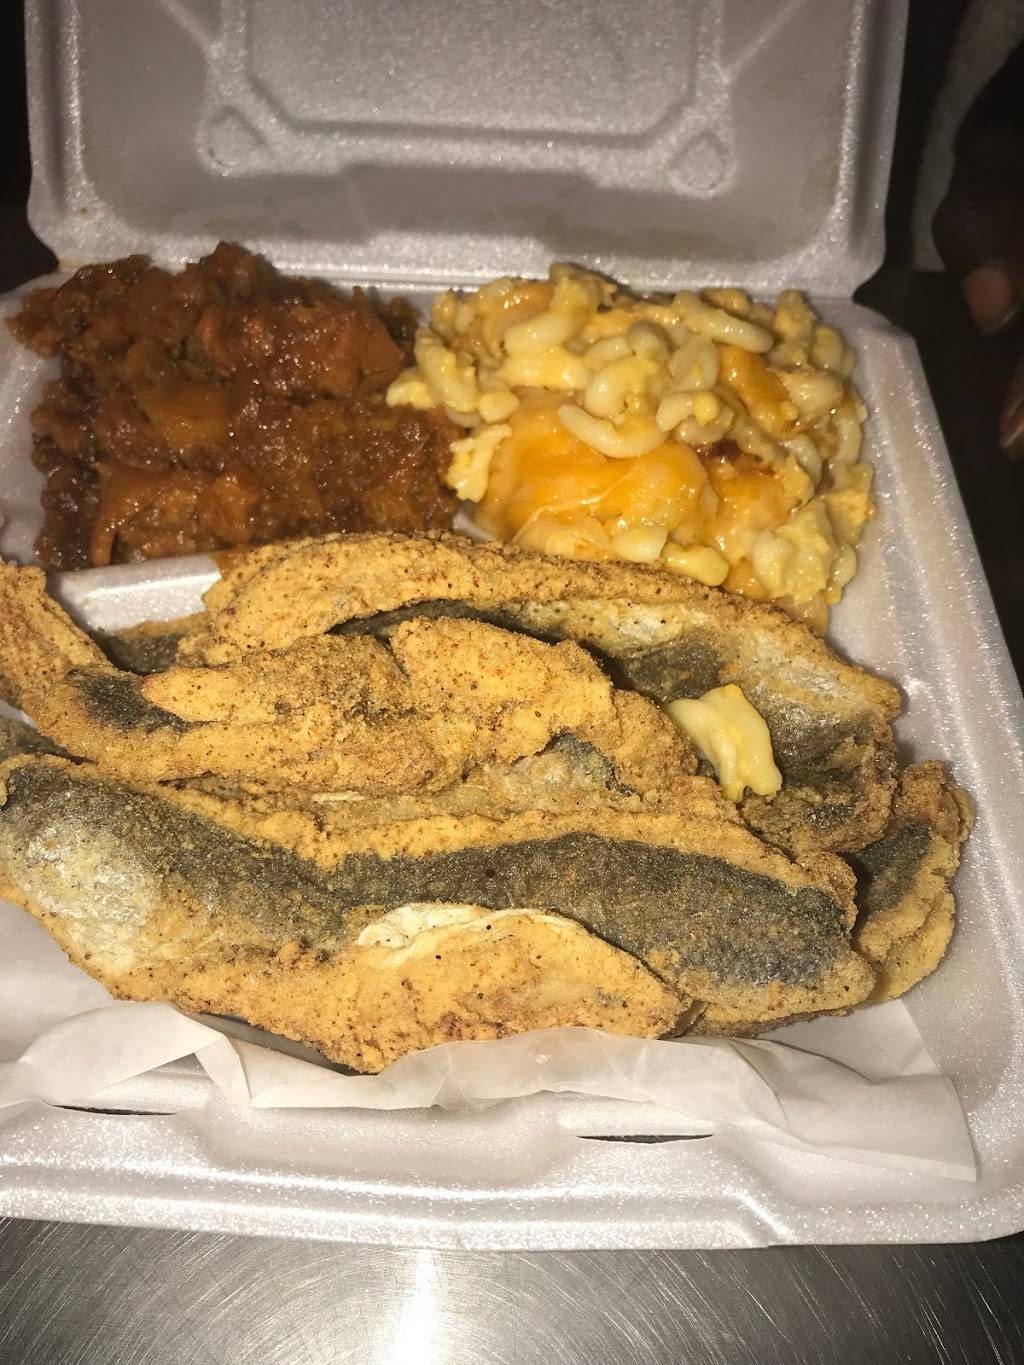 The Spot Soul Food | restaurant | 181 Broadway, Newburgh, NY 12550, USA | 8455630202 OR +1 845-563-0202